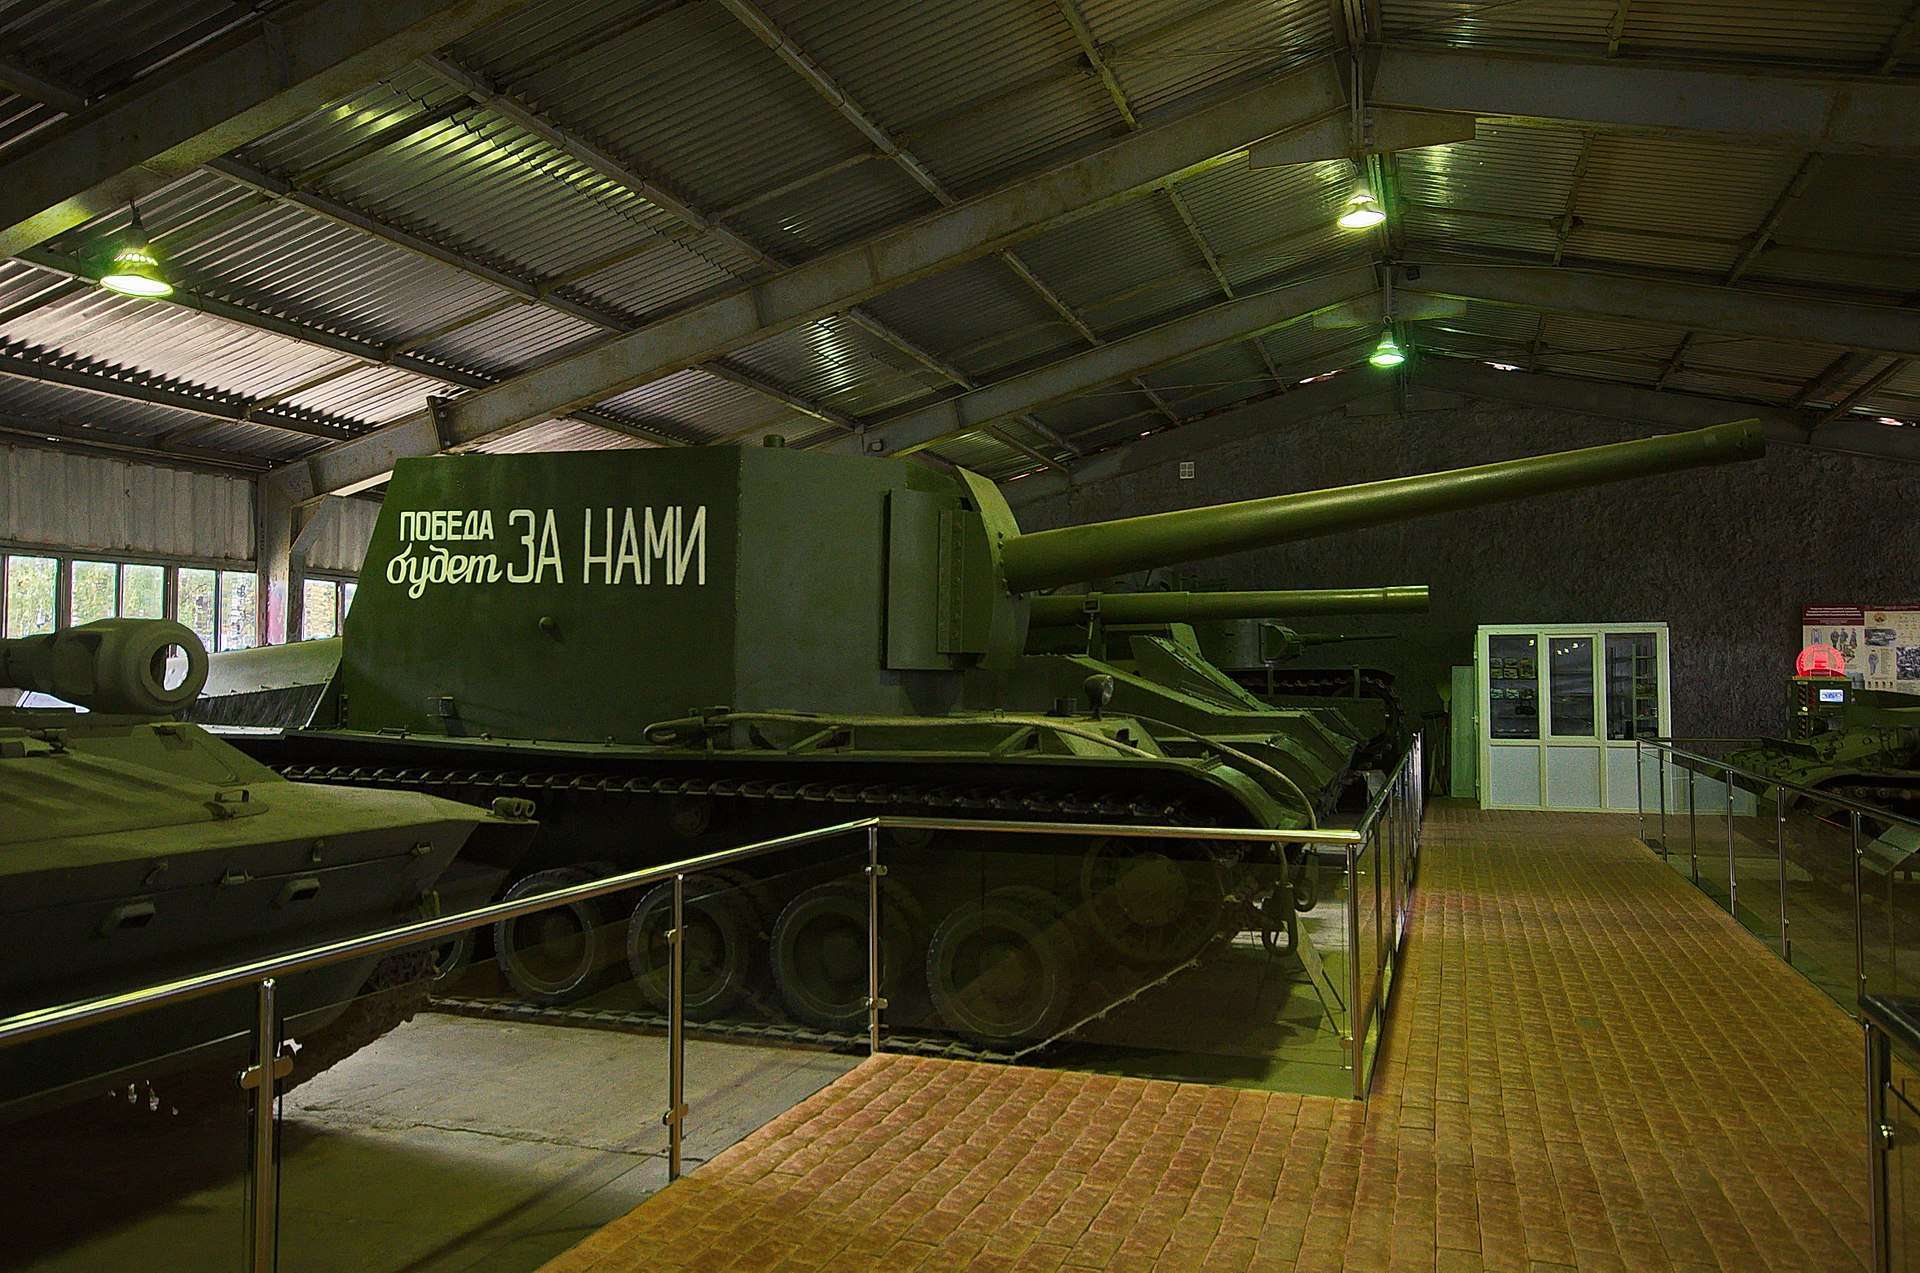 Side view of the SU-100Y, showing its gun.